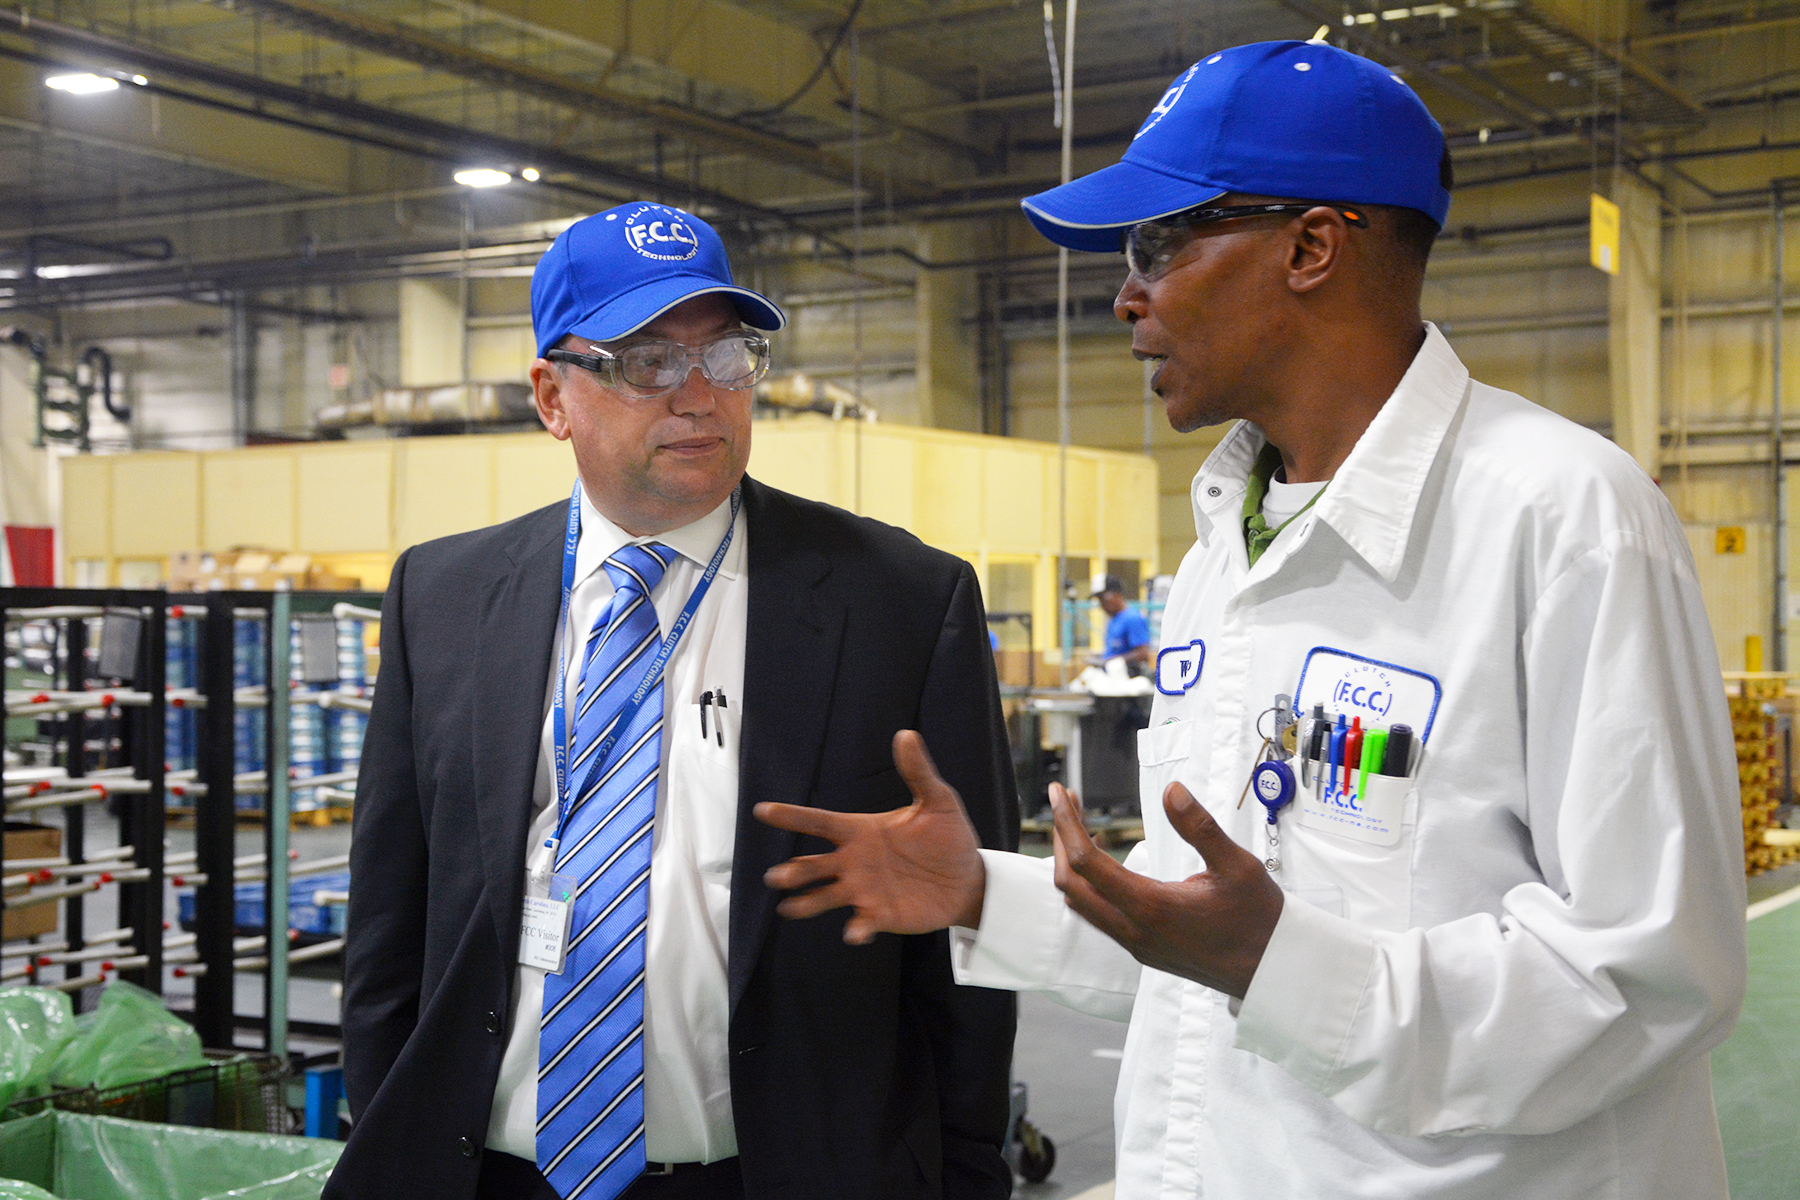 FCC Administration Manager Wayne Cromartie, right, describes to Dr. Dale McInnis, president of Richmond Community College, some of the manufacturing processes that go on in the Laurel Hill plant.